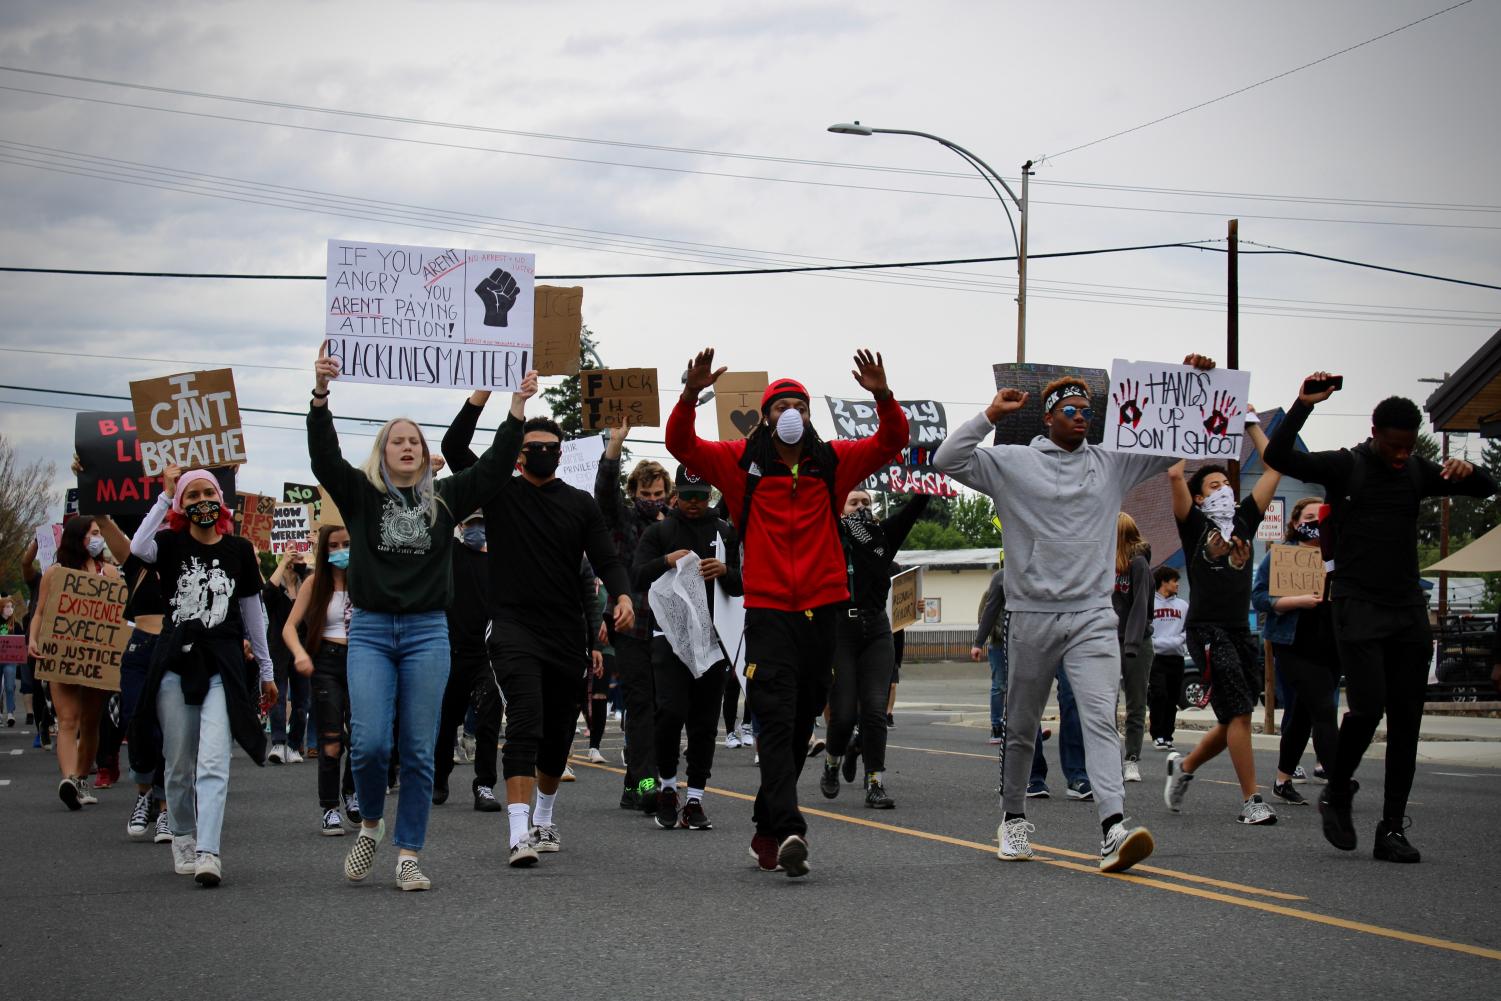 Protesters+continue+to+rally+in+Ellensburg%2C+despite+fears+of+violence